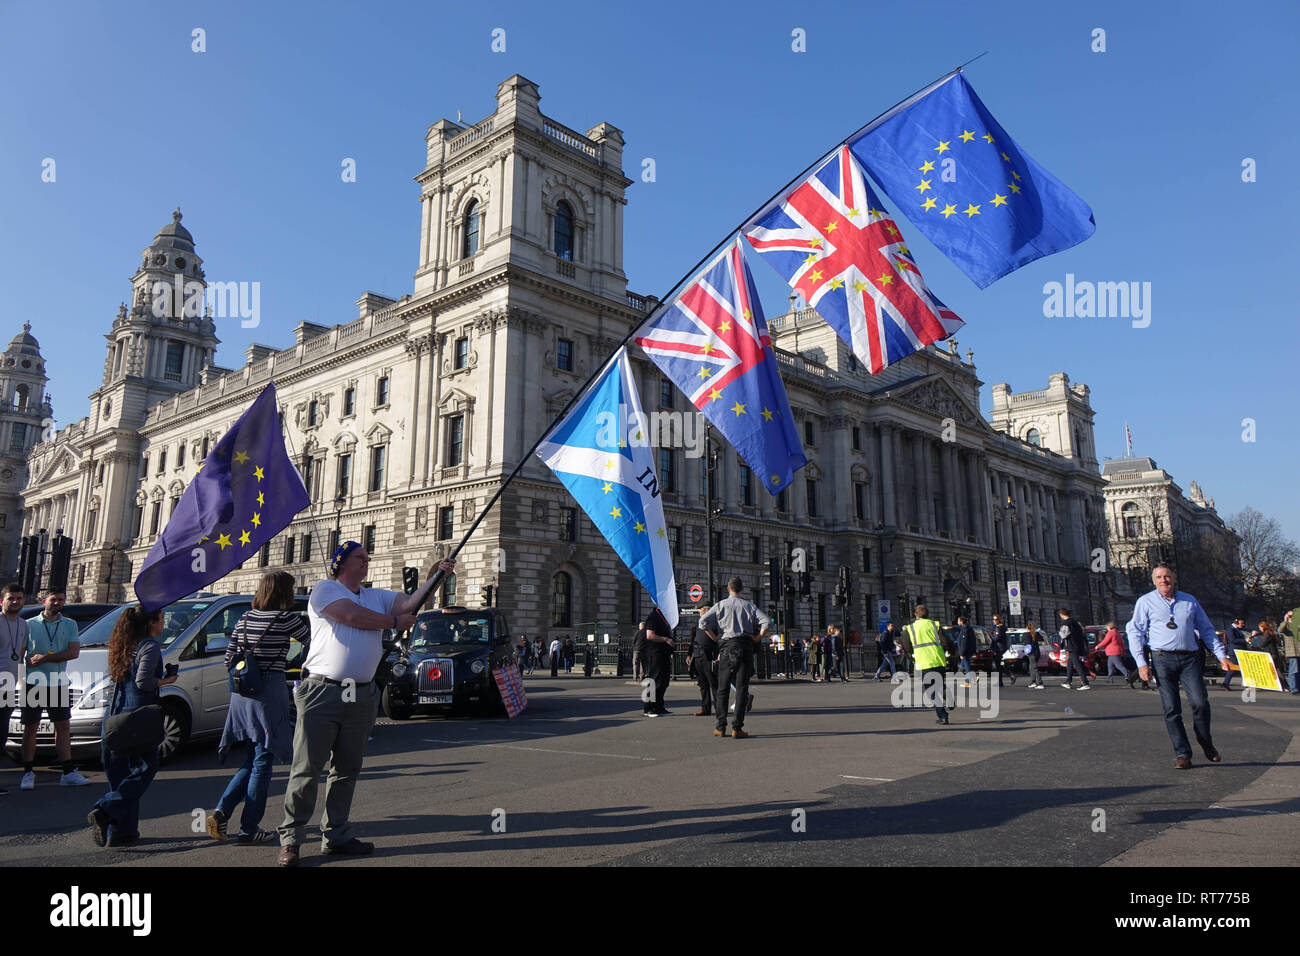 Westminster, London, UK. 27th Feb, 2019. Anti-Brexit Activist demonstrate opposite Palace Of Westminster in London. Credit: Thomas Krych/Alamy Live News Stock Photo